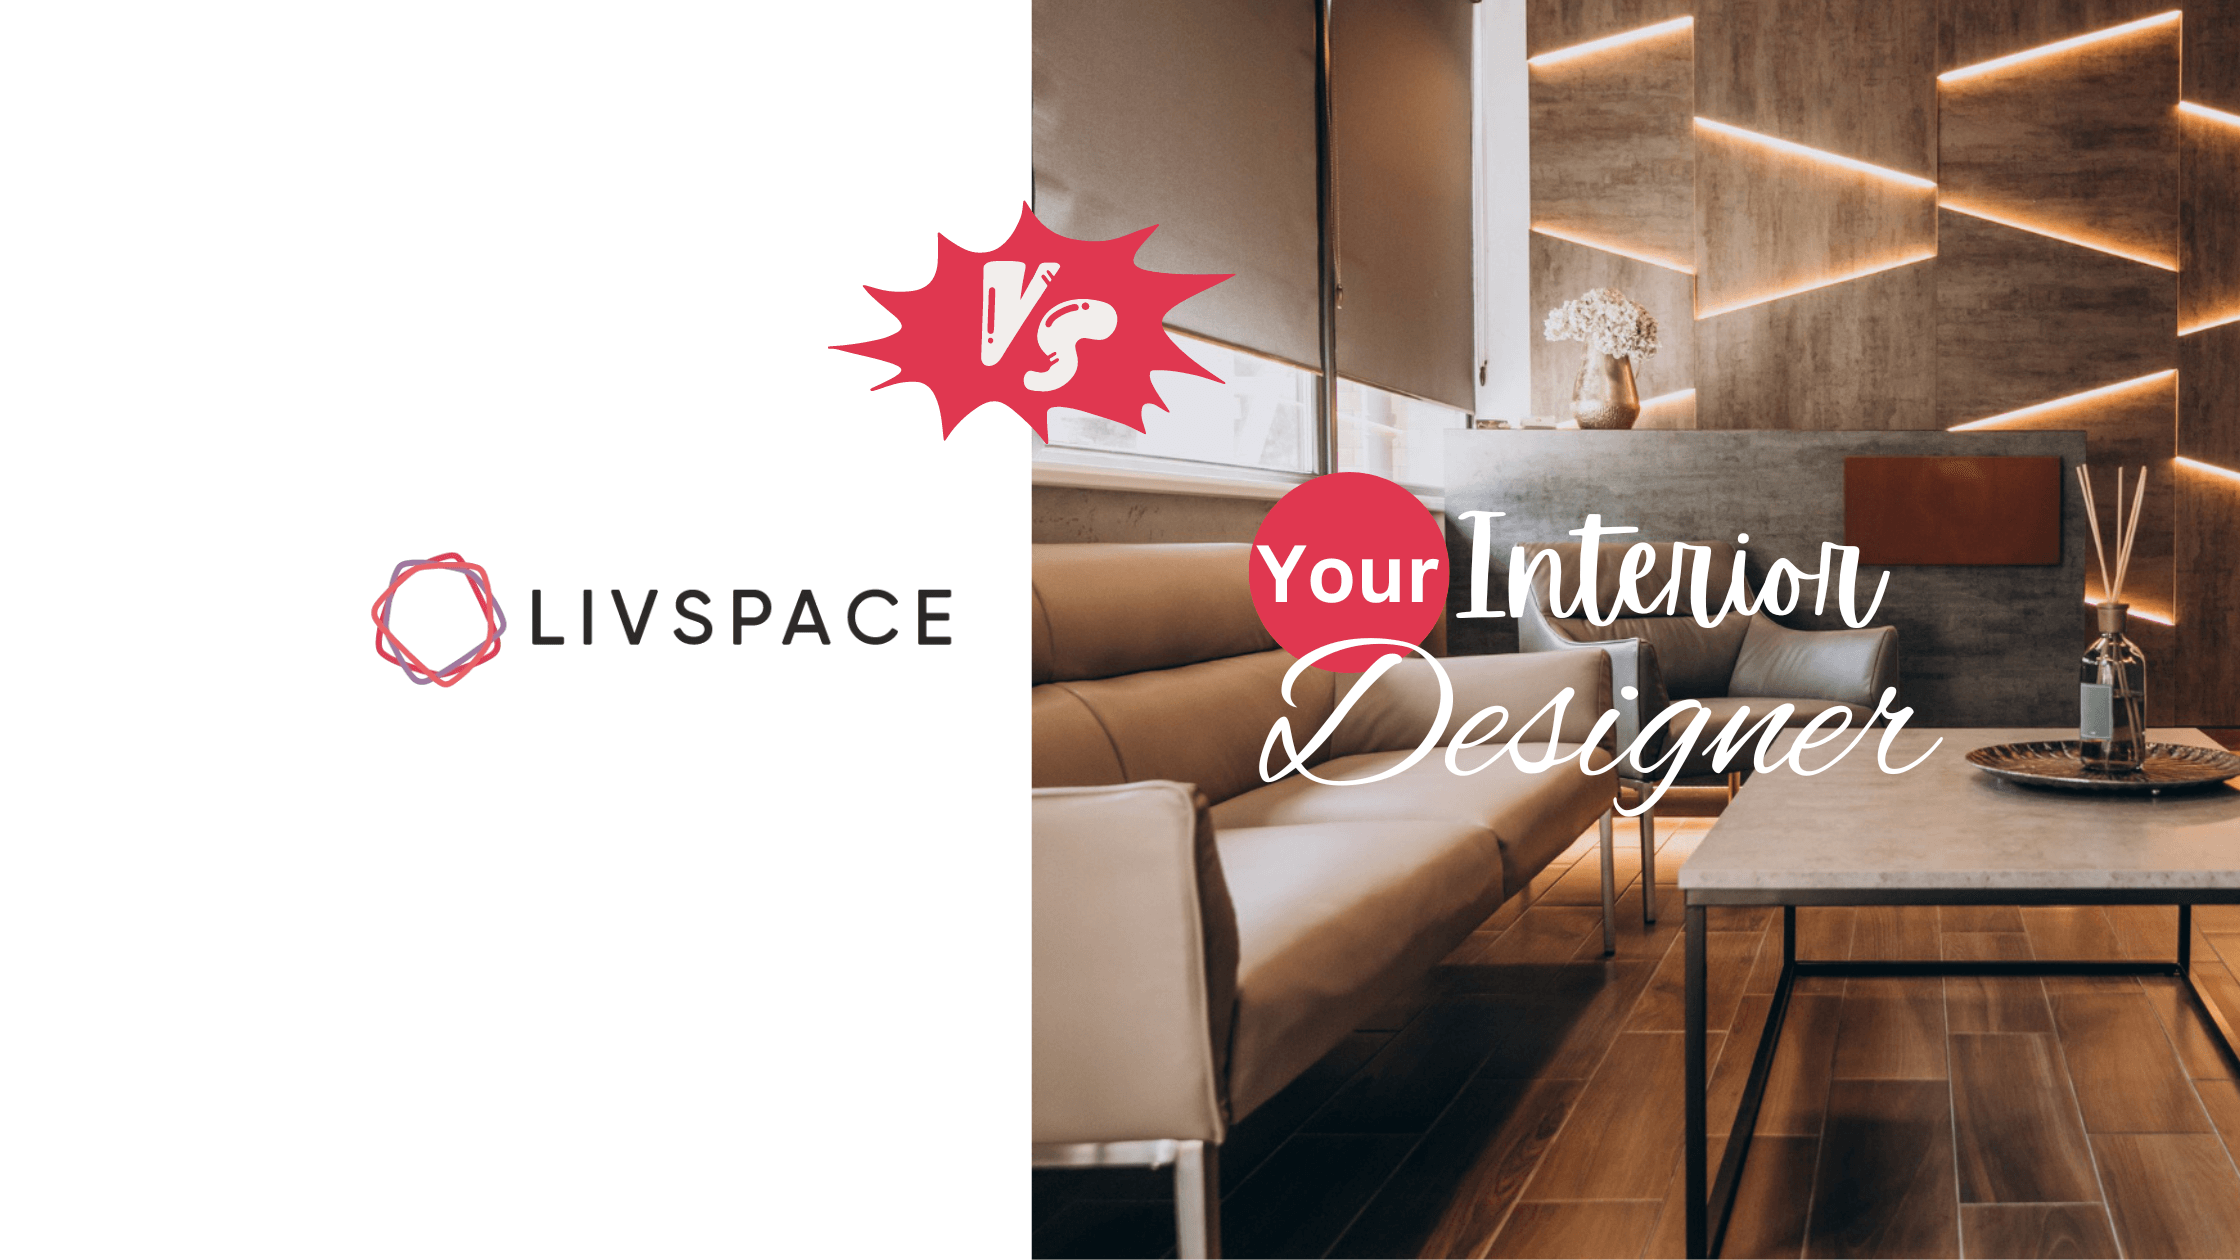 Livspace vs. Your Interior Designers Why Choosing a Nearby Interior Designer is Better